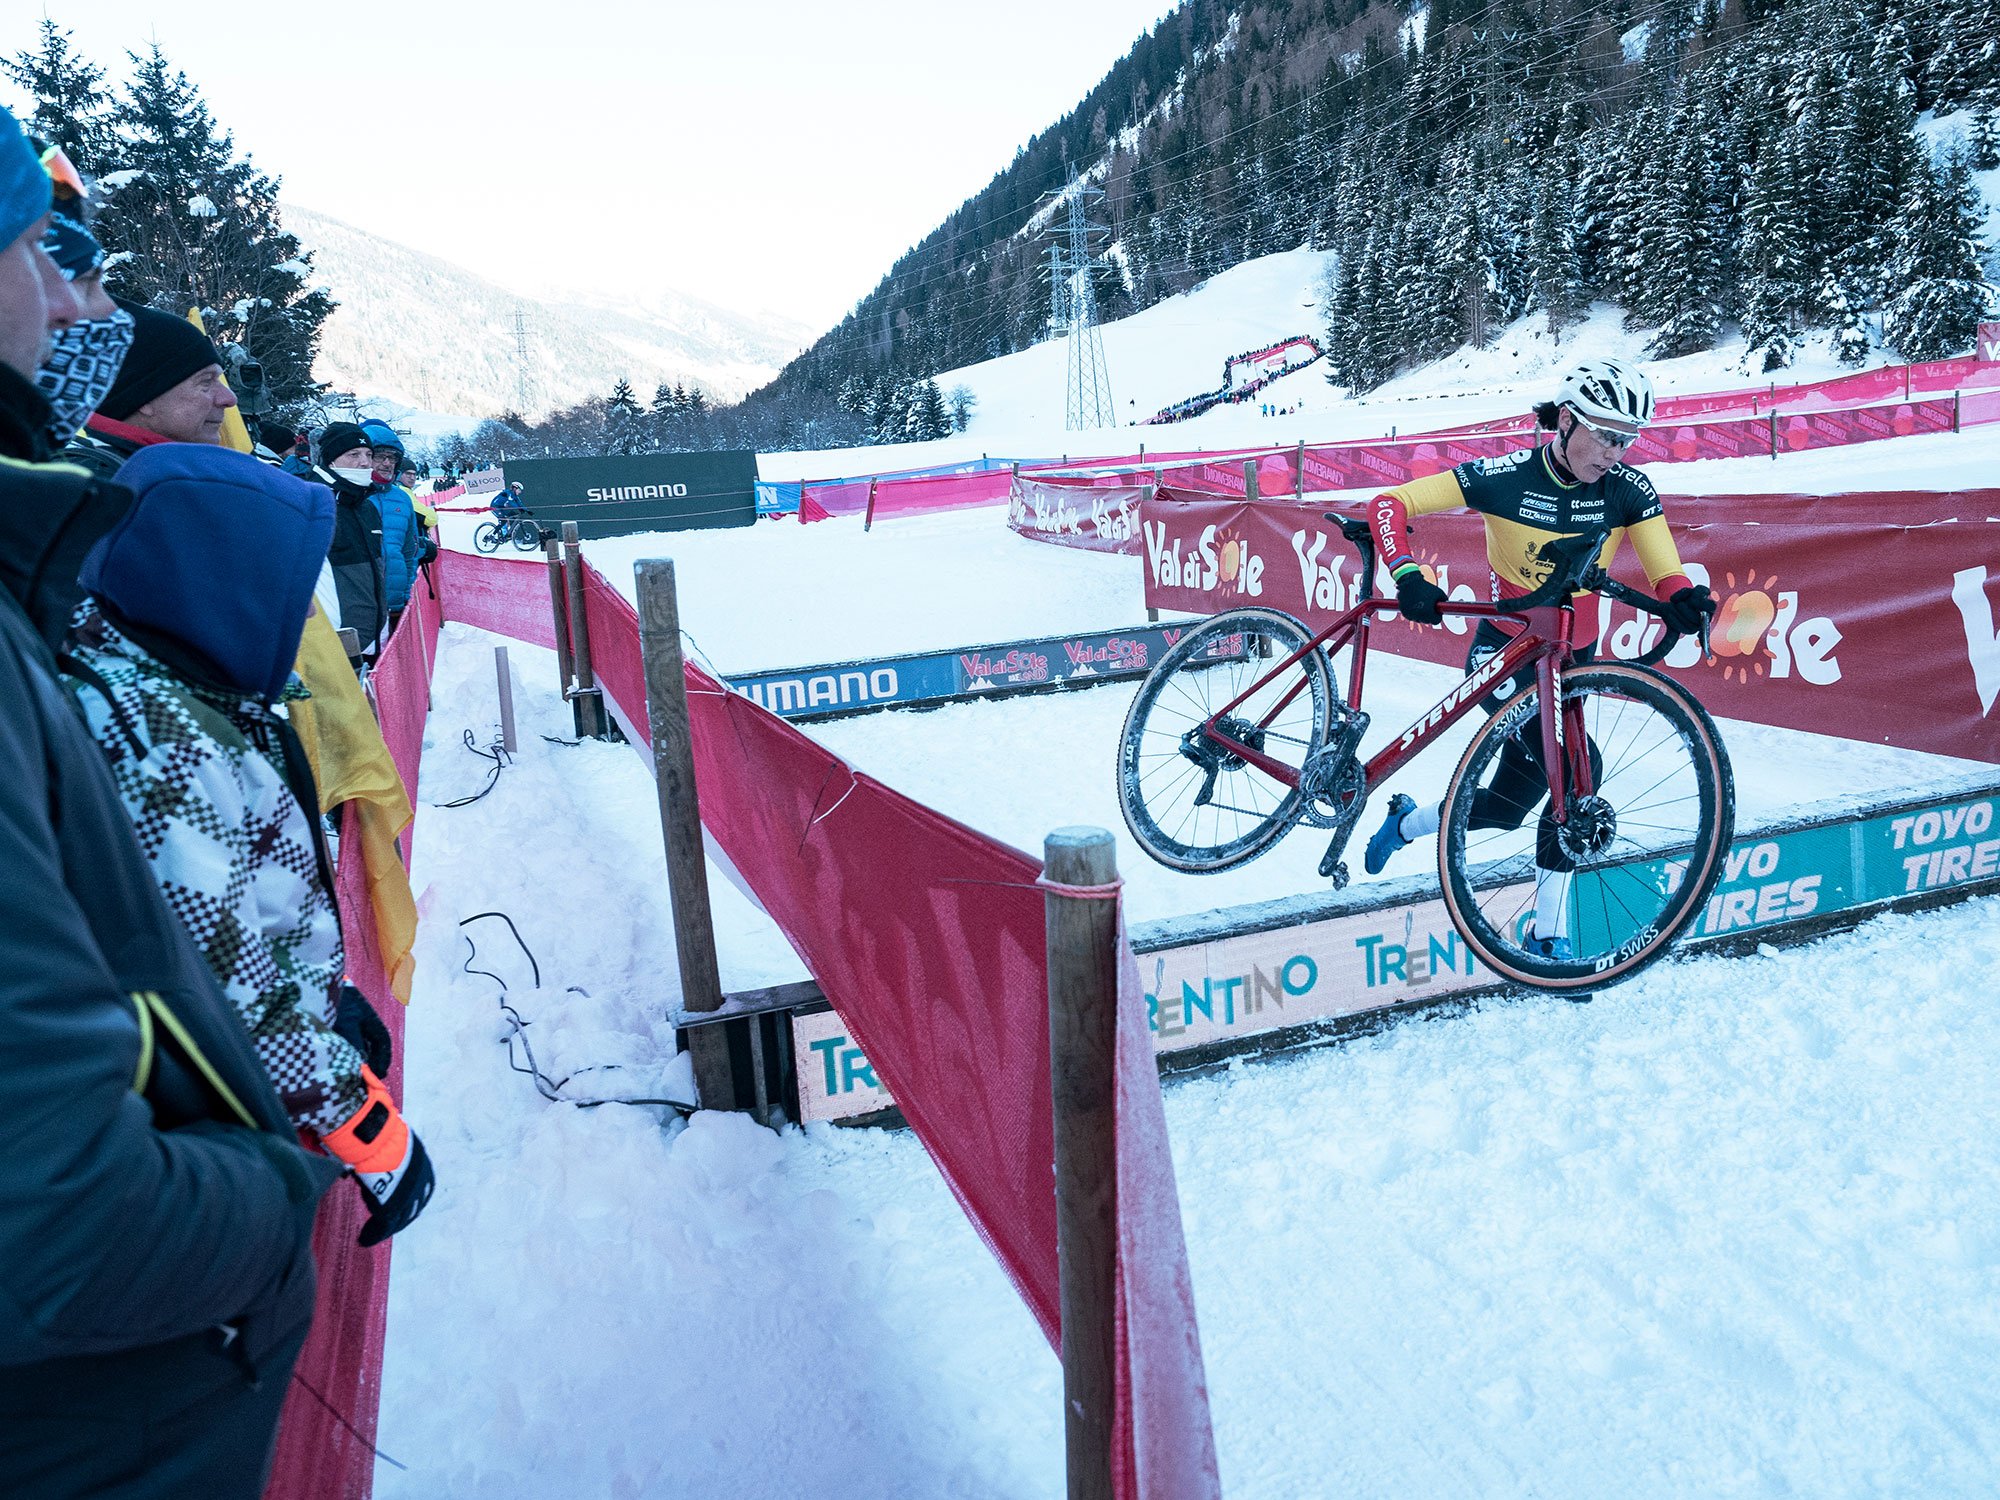 Sanne Cant tackles the hurdles at Val di Sole 2021